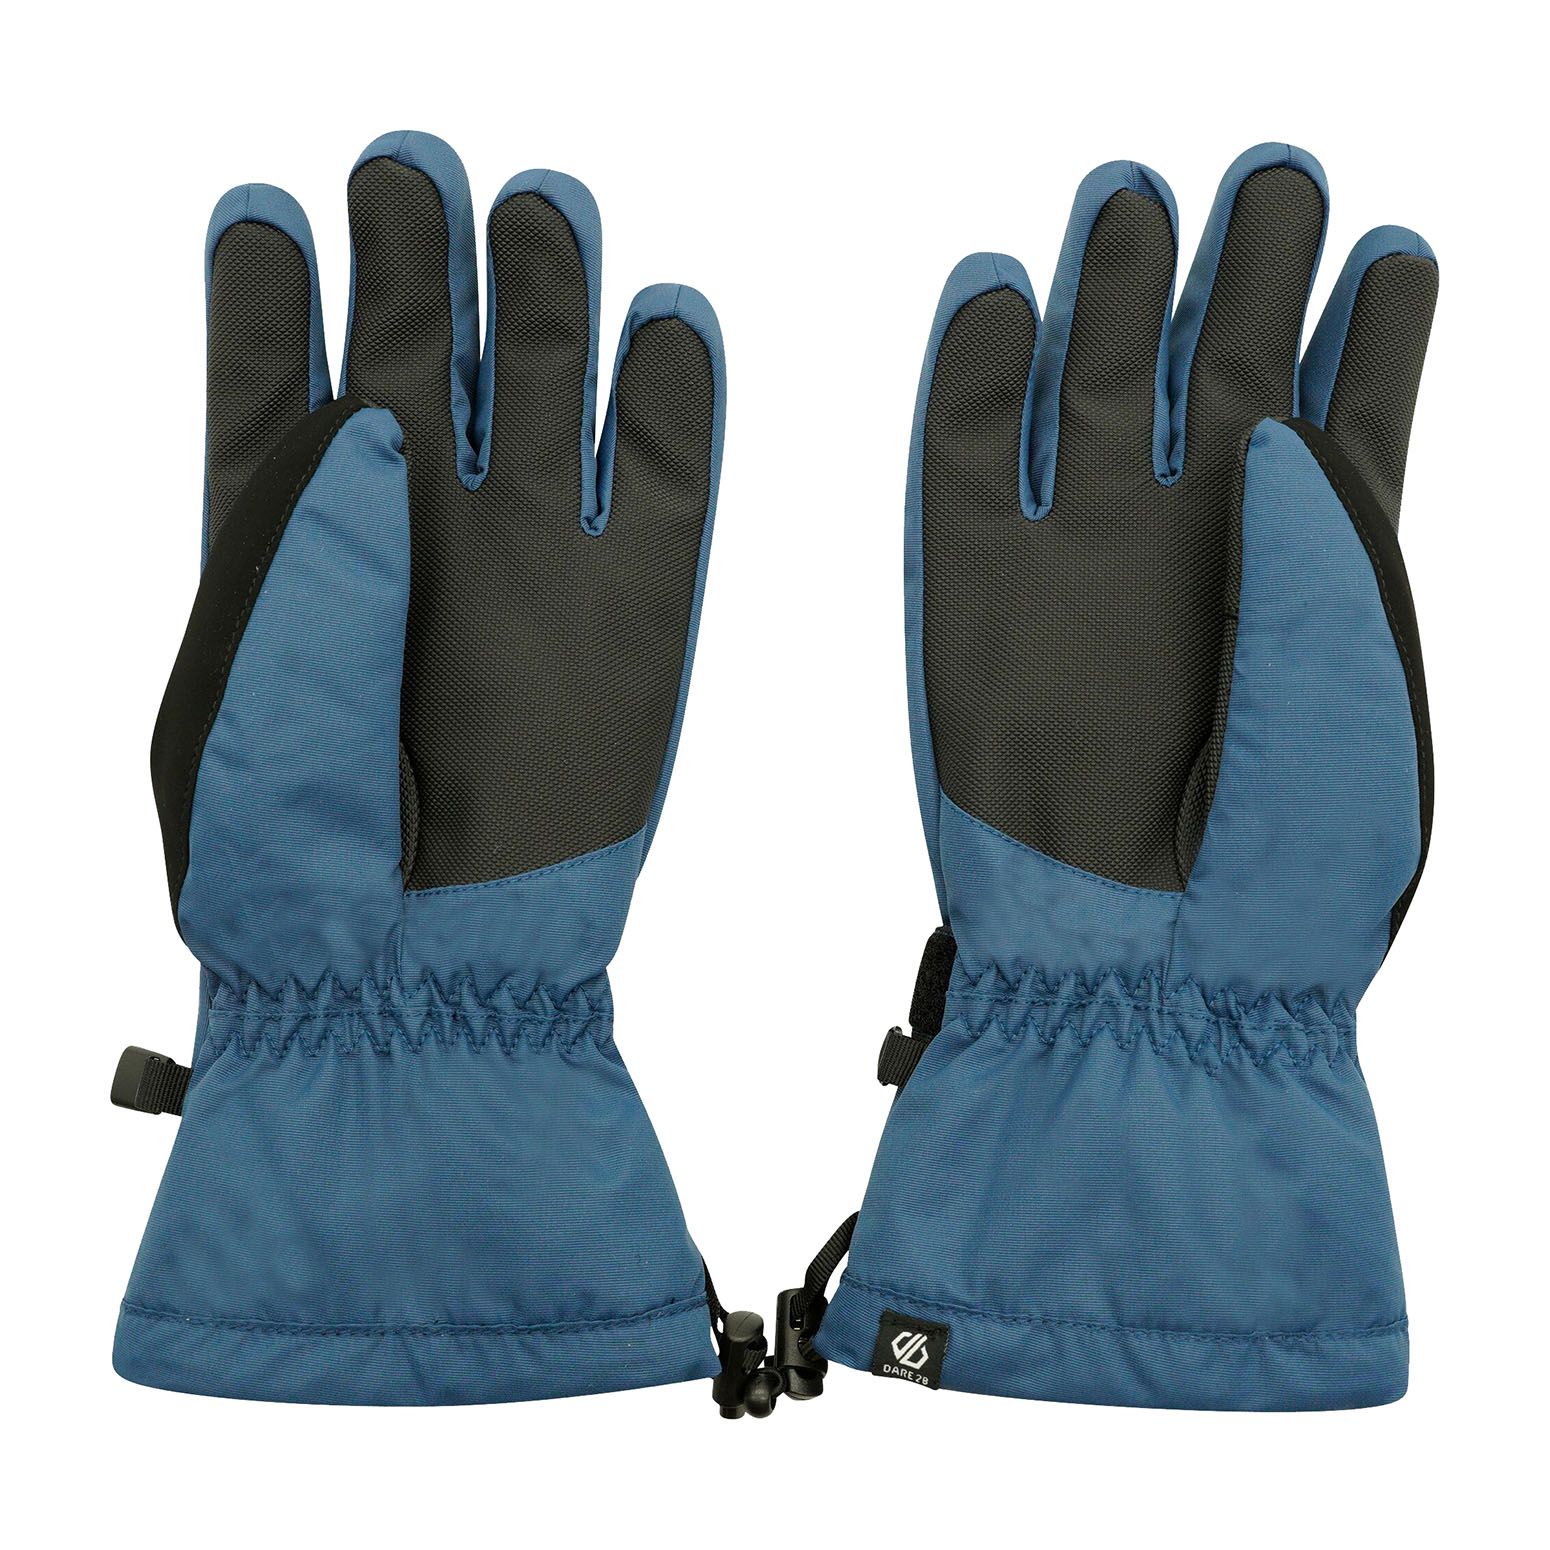 Polyester fabric with waterproof and breathable Ared 5000 insert. Water repellent finish. High loft polyester padding. Warm scrim lining. Synthetic nubuck thumb. Textured gripped palm. Elasticated wrist. Adjustable cuffs. Secure clip attachment. Shockcord and toggle lower wrist adjustment.